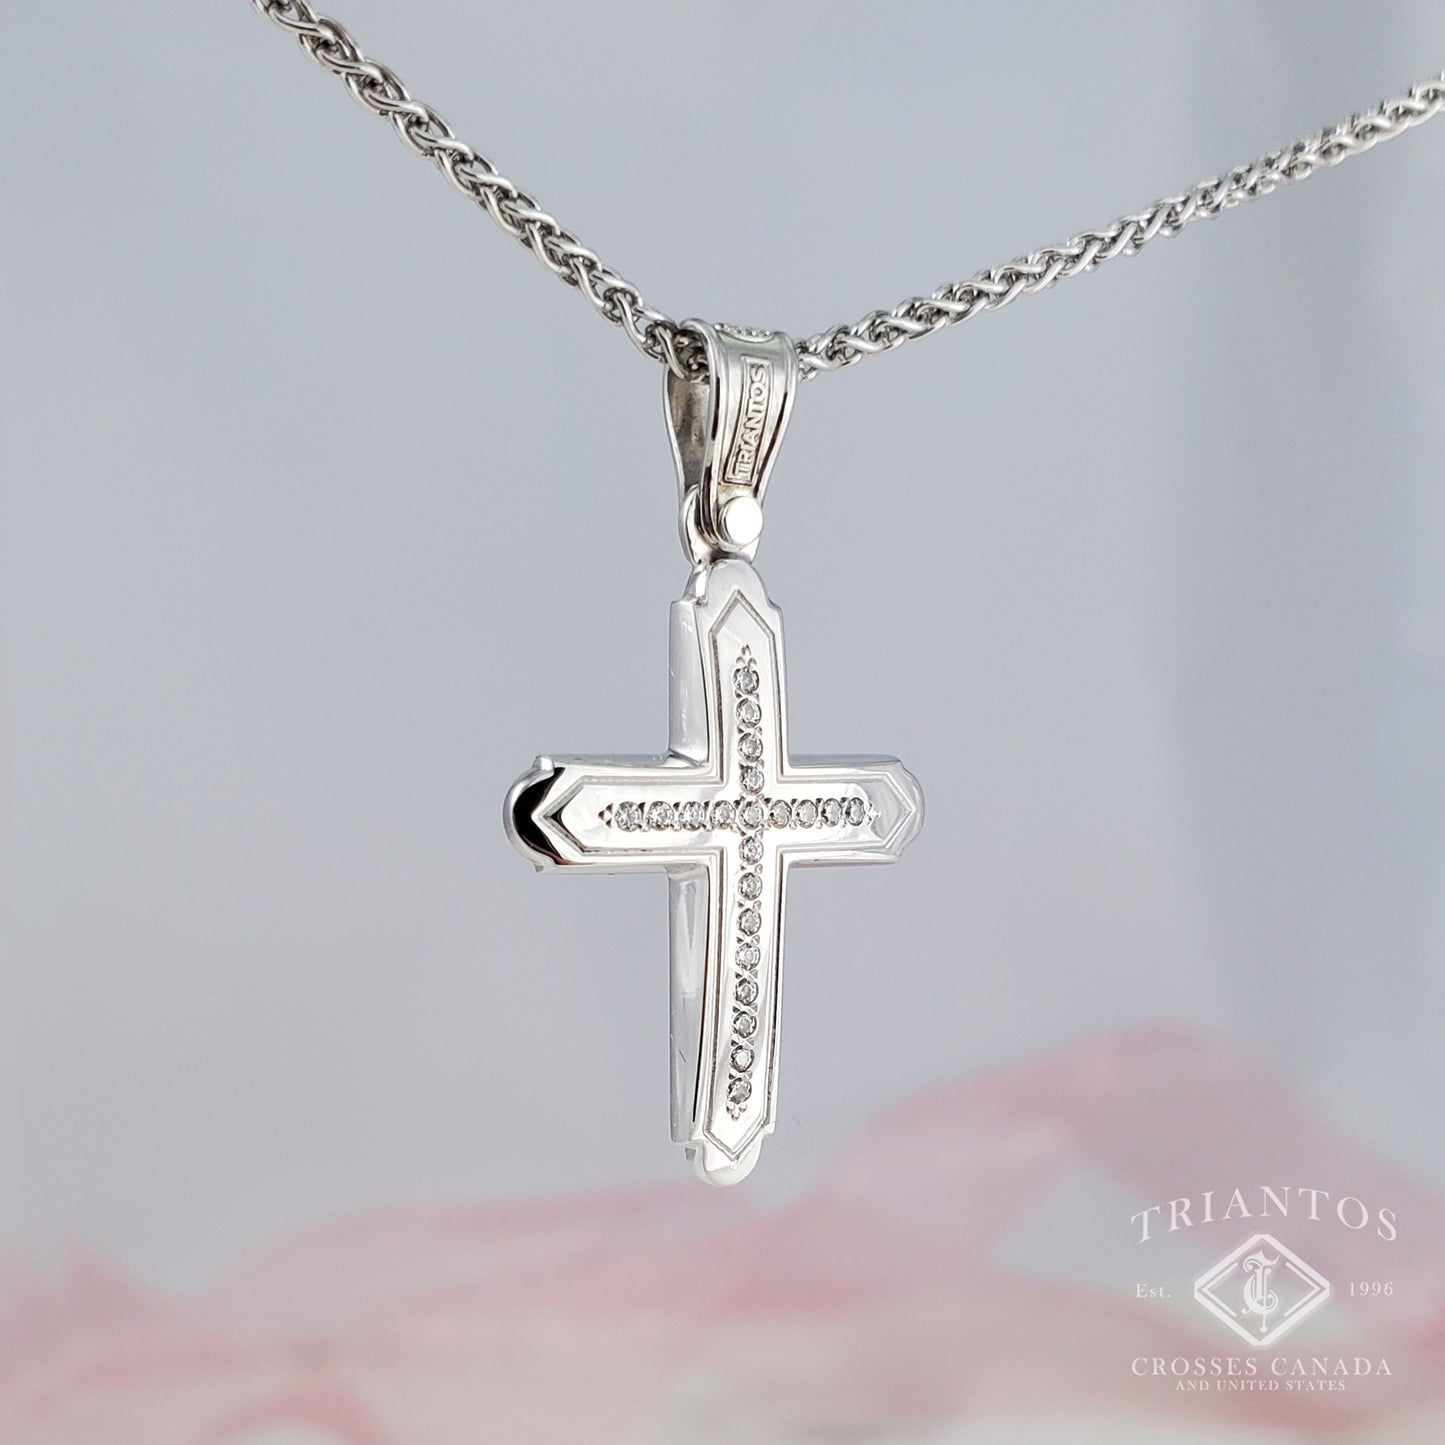 Woman's White gold cross pendant centered with 21 Sparkling cubic zirconia diamond-shaped stones and edged outline